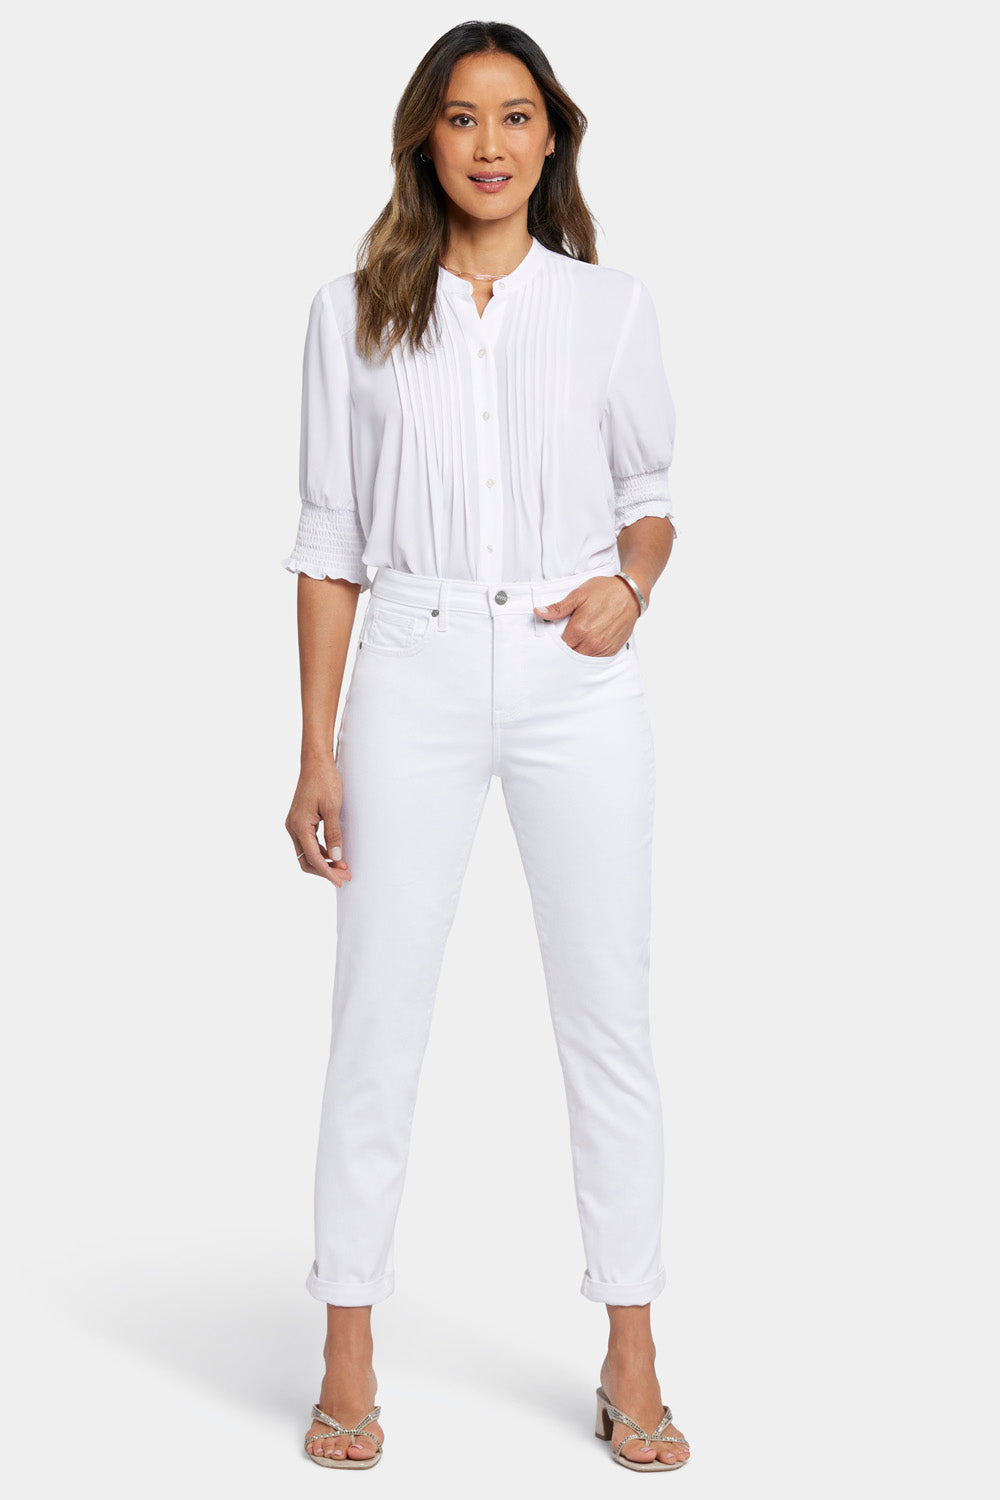 NYDJ Margot Girlfriend Jeans With Roll Cuffs - Optic White